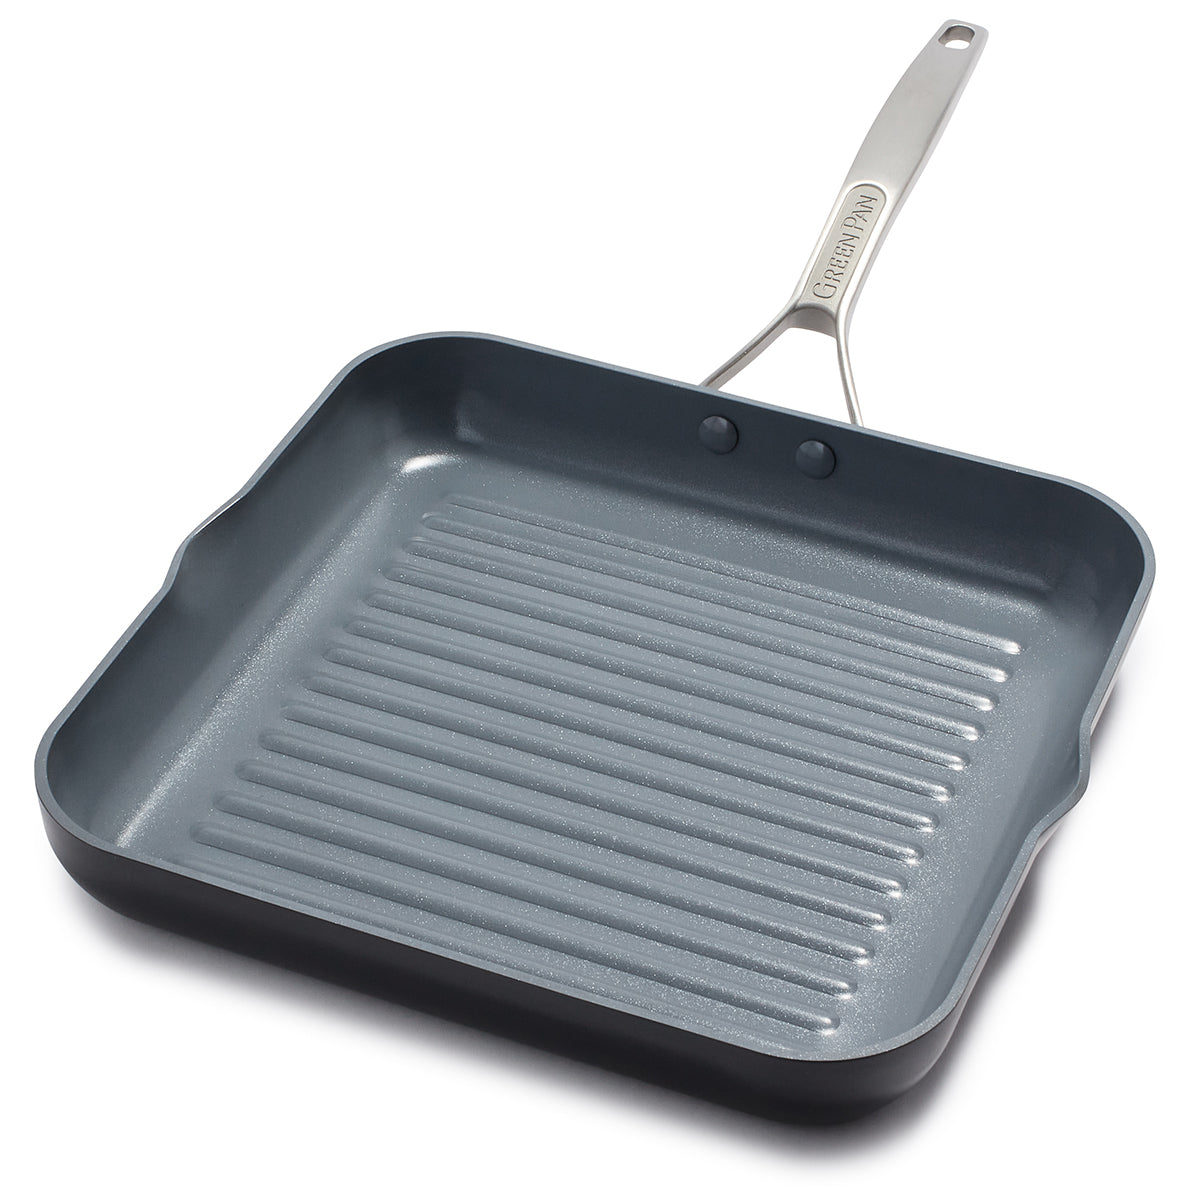  Sensarte Nonstick 11-Inch Square Grill Pan, 3-Section